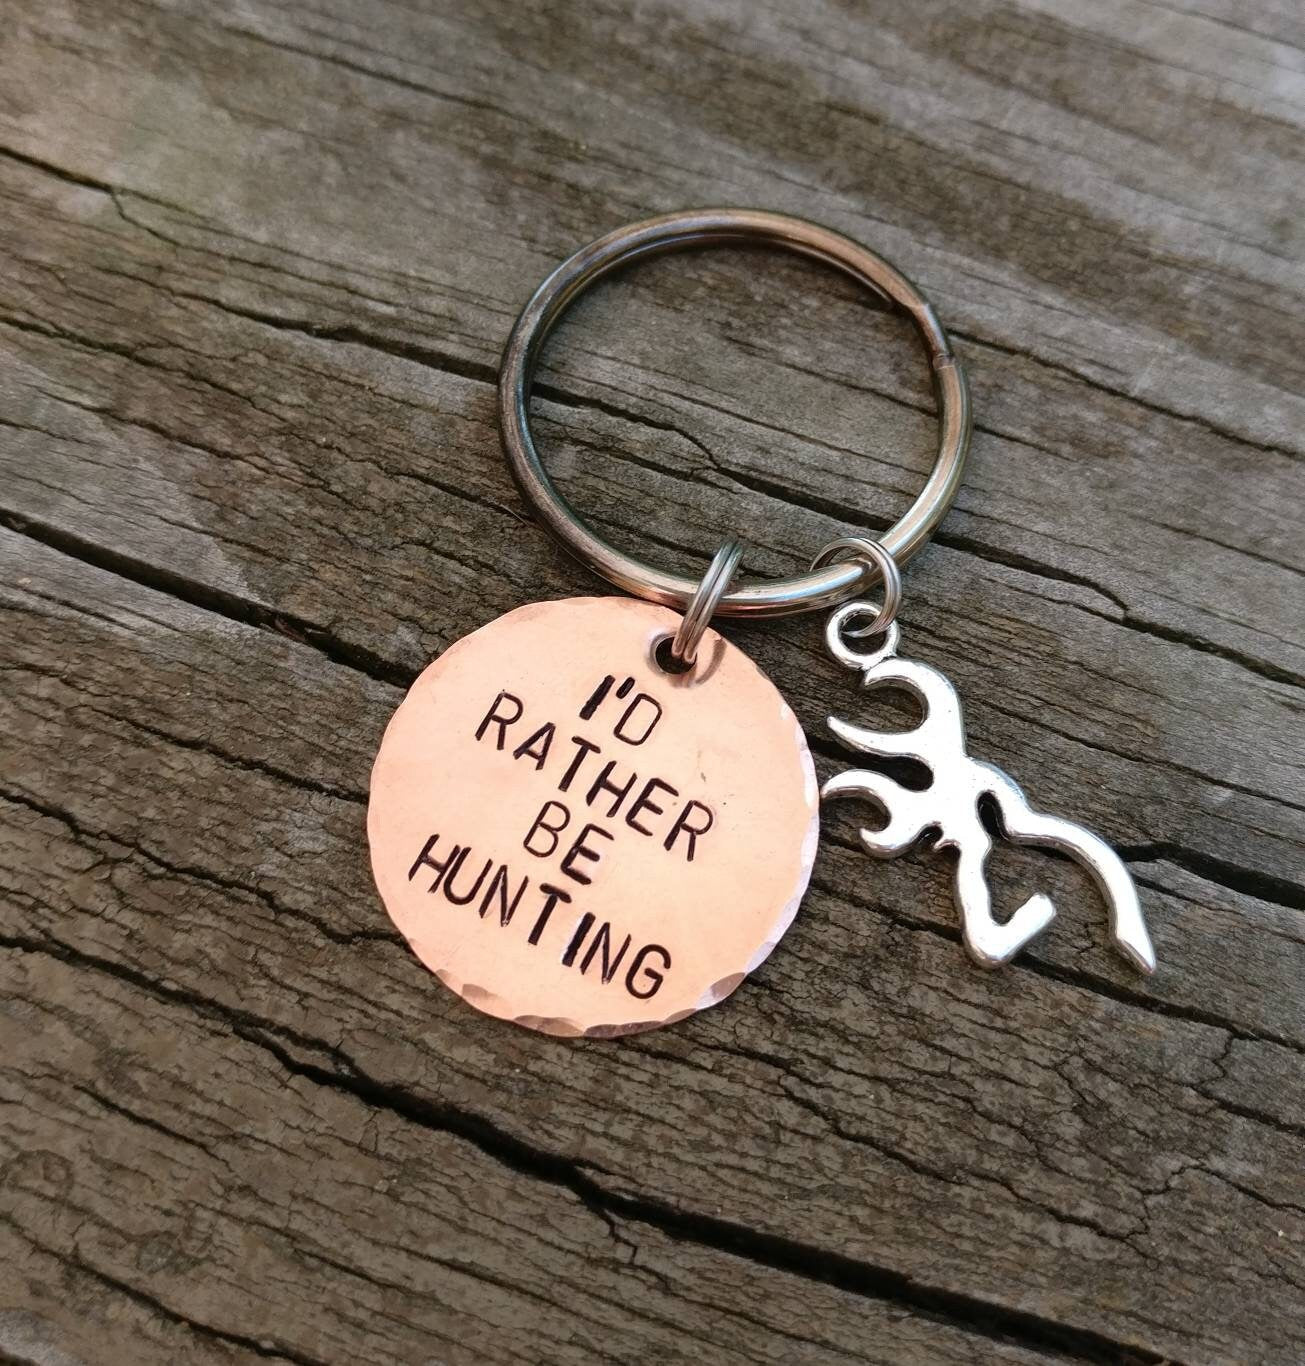 GIFT FOR DAD - Father's Day Gift, Hunting Gift, Hunting Gift, Hunting Keychain, Gift for Dad, Gift for Grandpa, Birthday gift